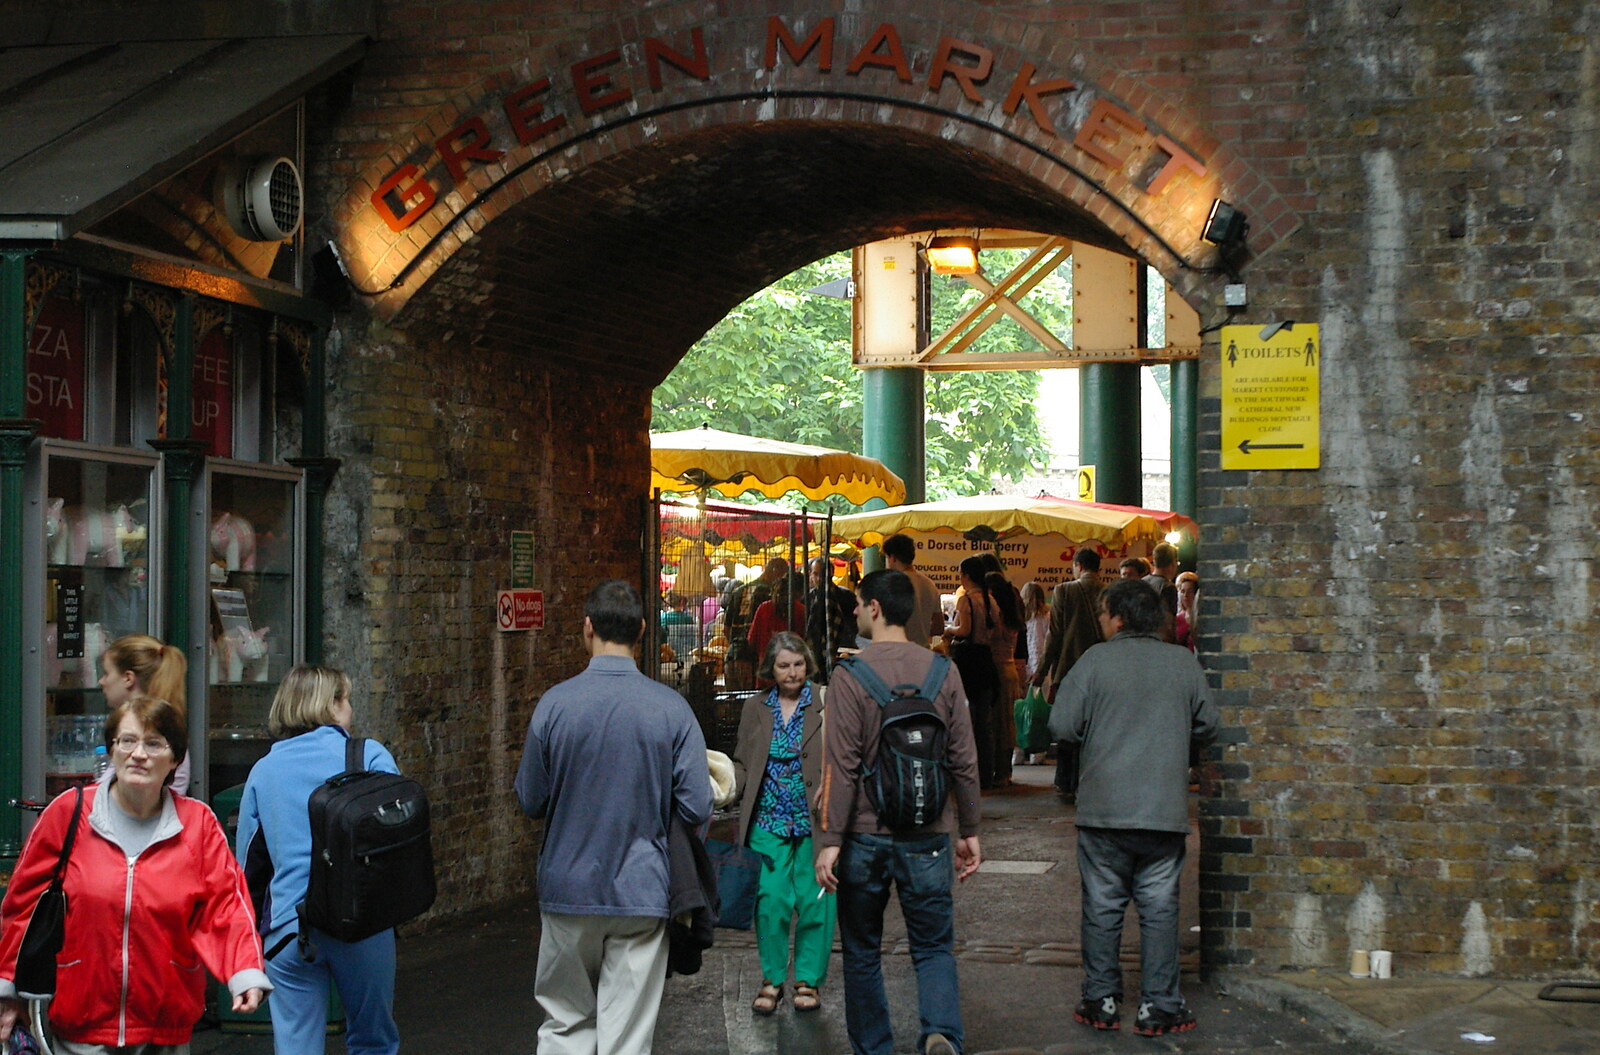 Under the arches and the Green Market from Borough Market and North Clapham Tapas, London - 23rd July 2005